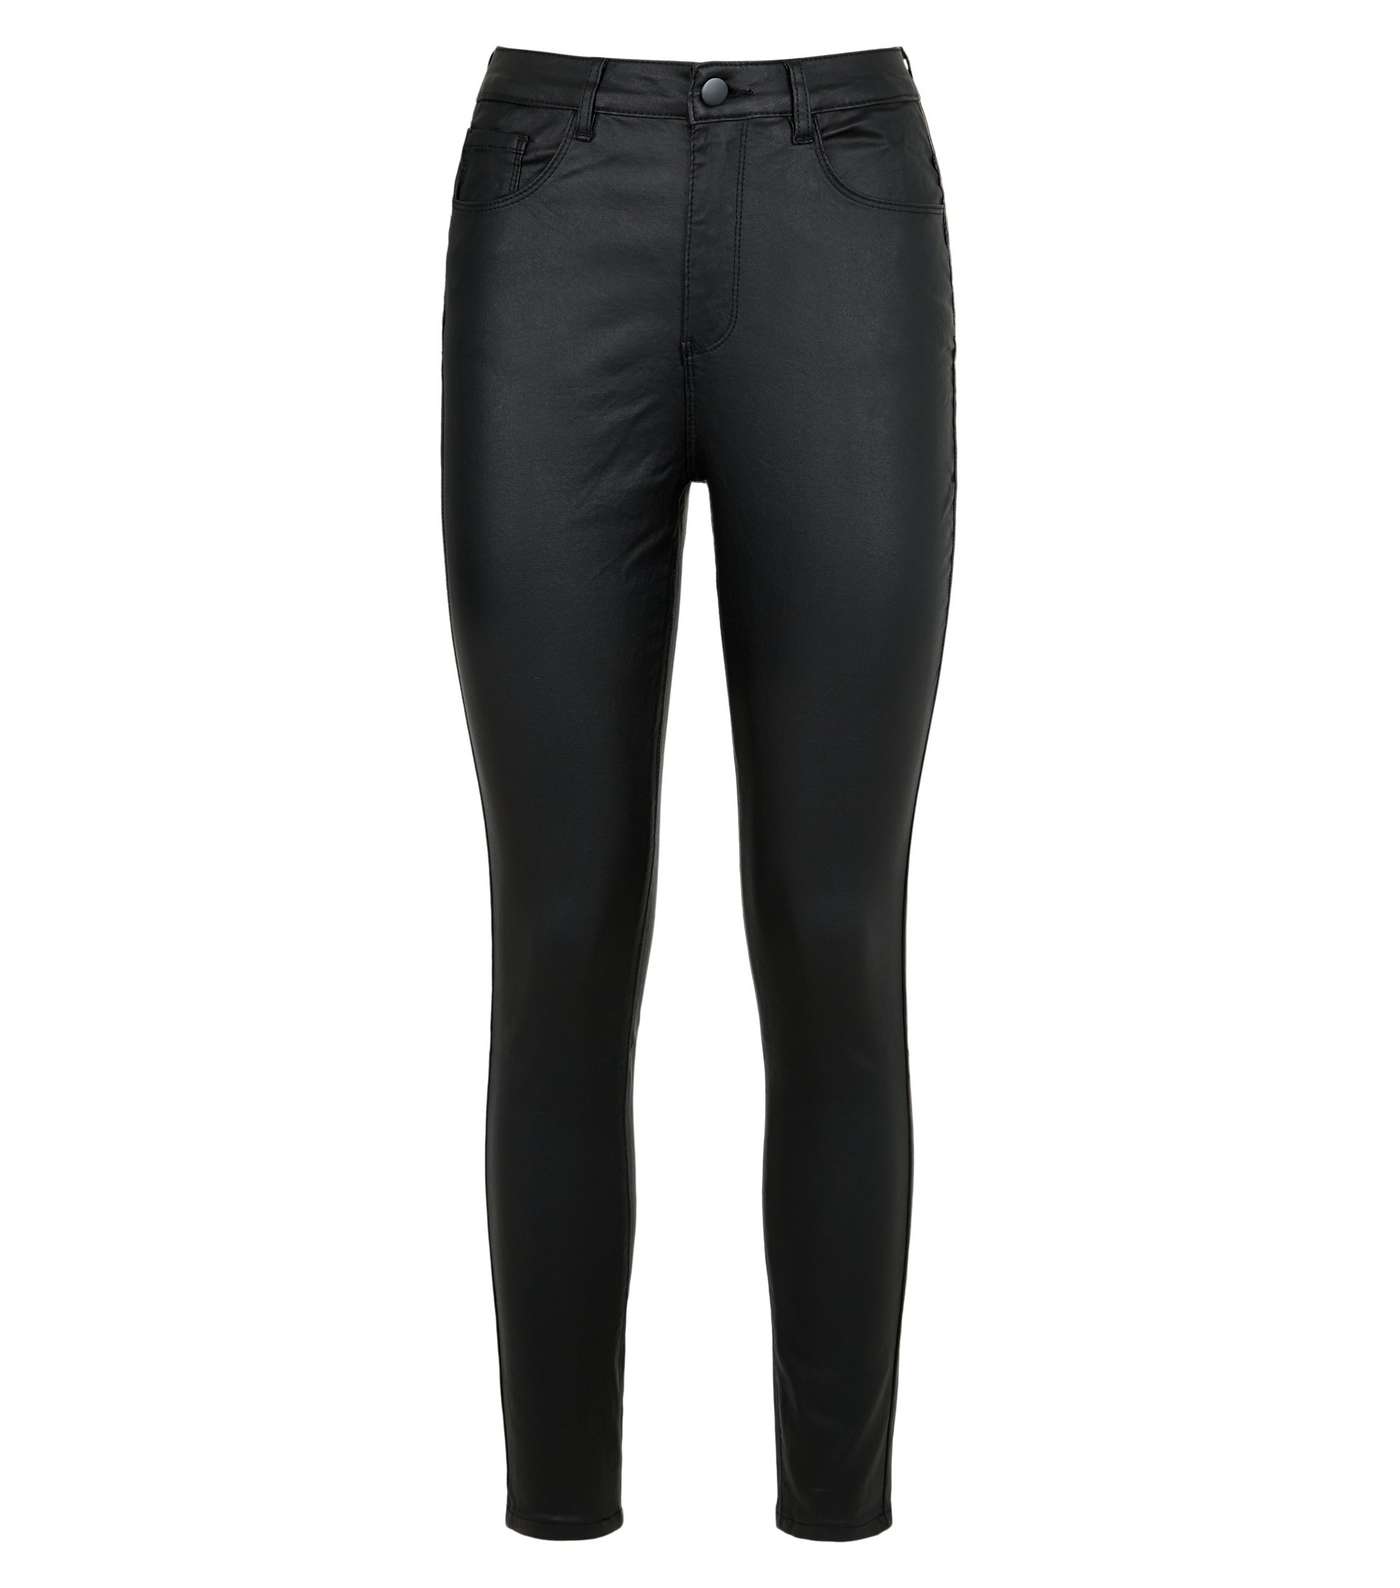 Urban Bliss Black Leather-Look Skinny Jeans  Image 4